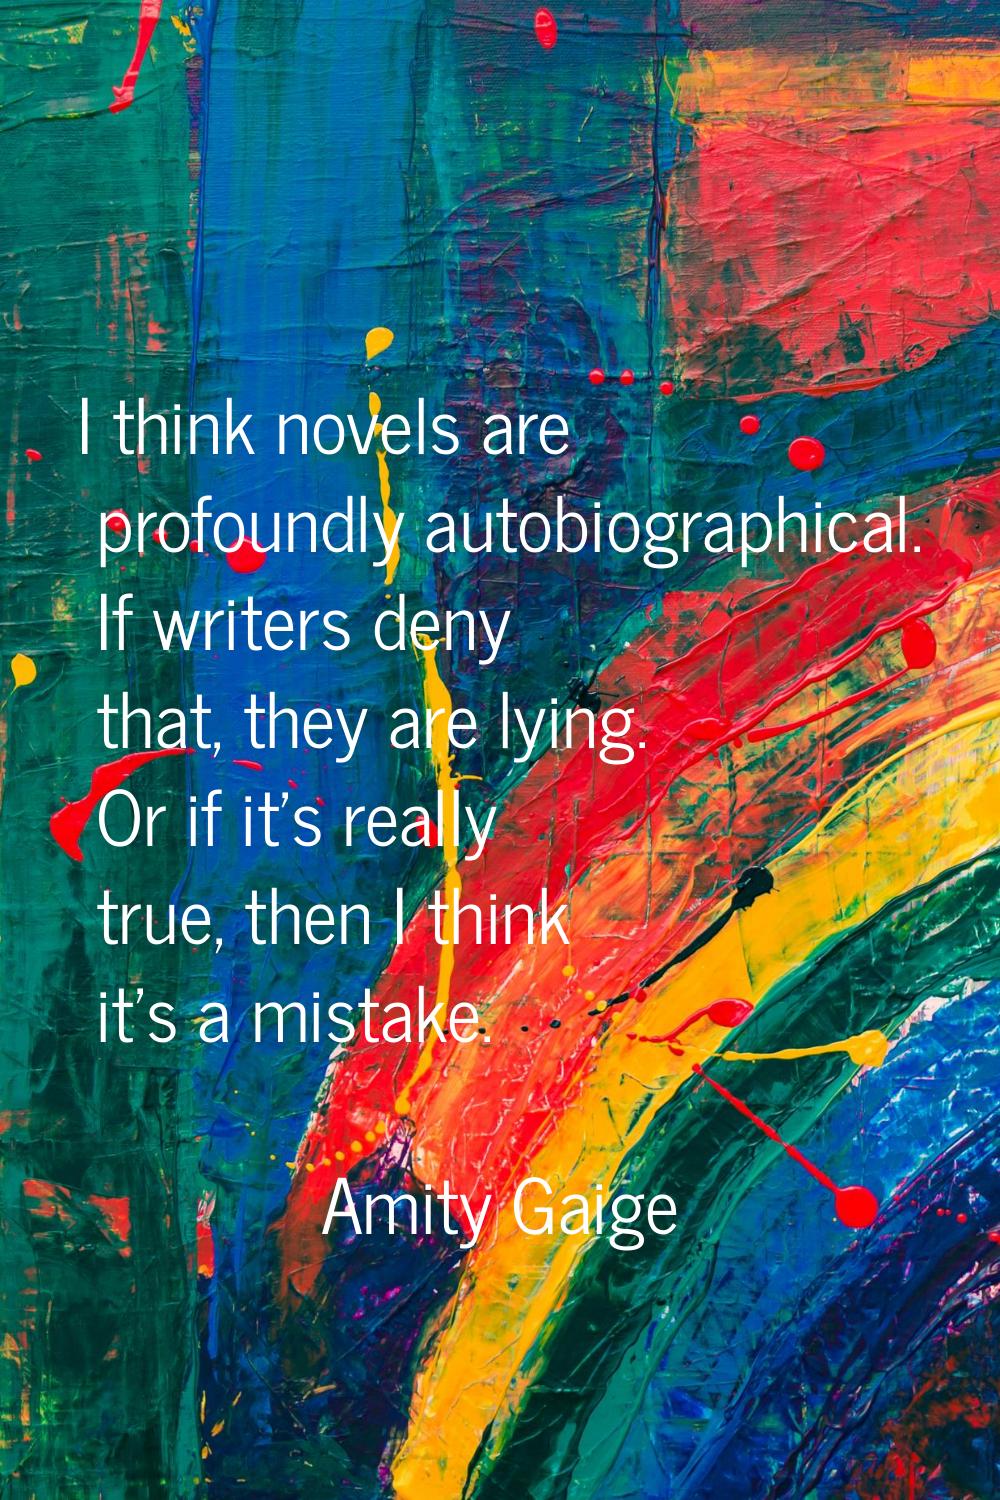 I think novels are profoundly autobiographical. If writers deny that, they are lying. Or if it's re